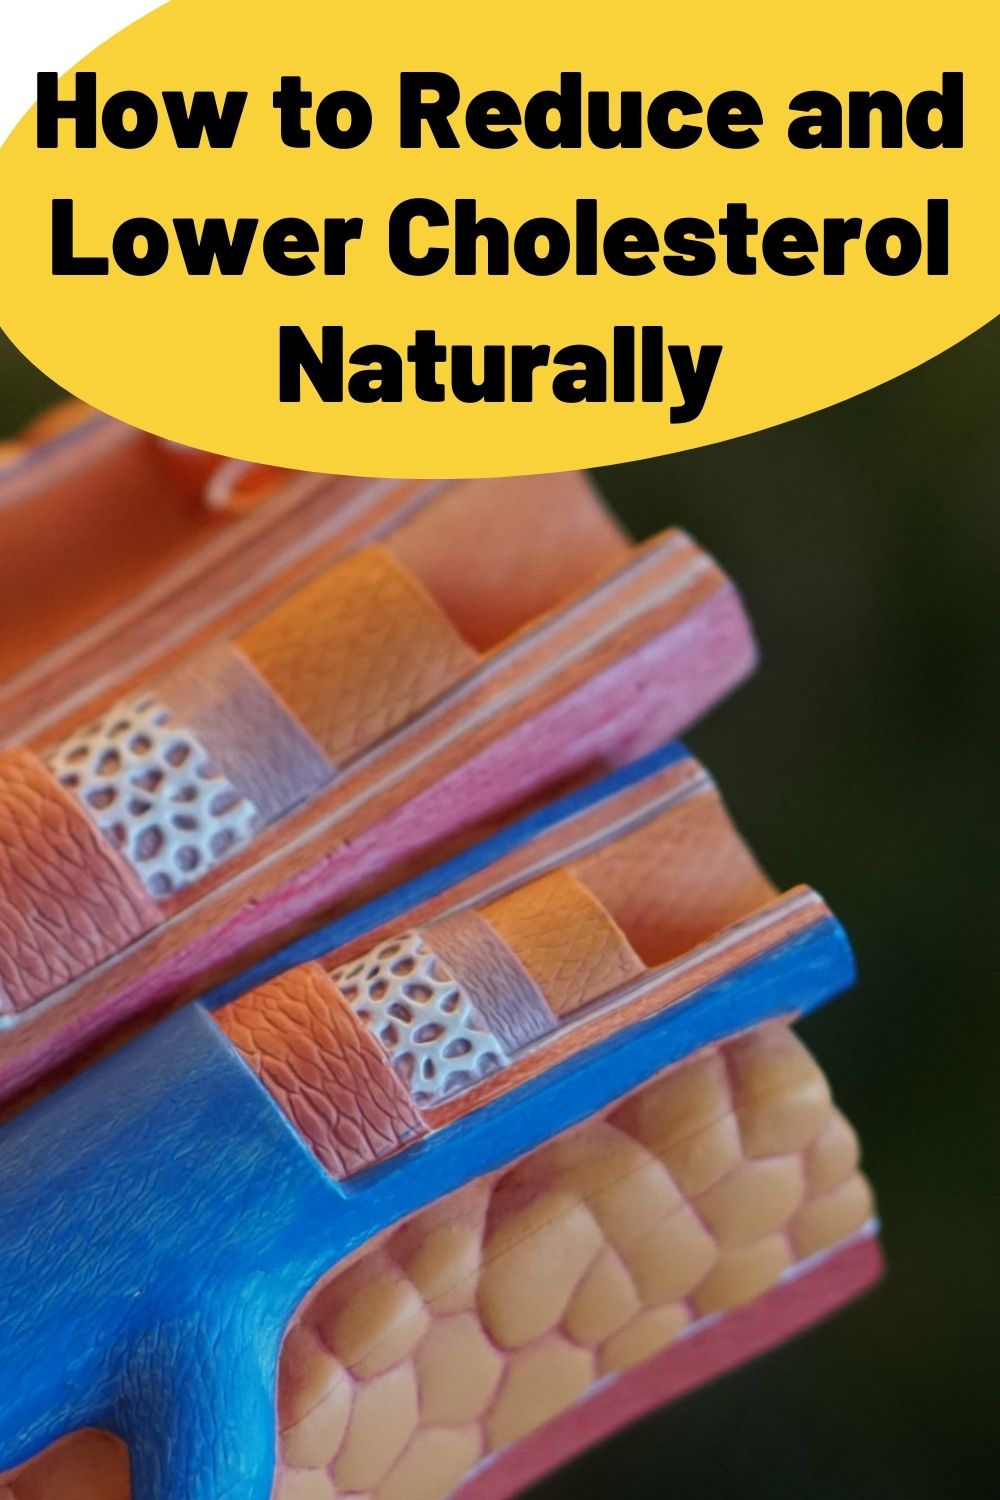 How to Reduce and Lower Cholesterol Naturally PIN